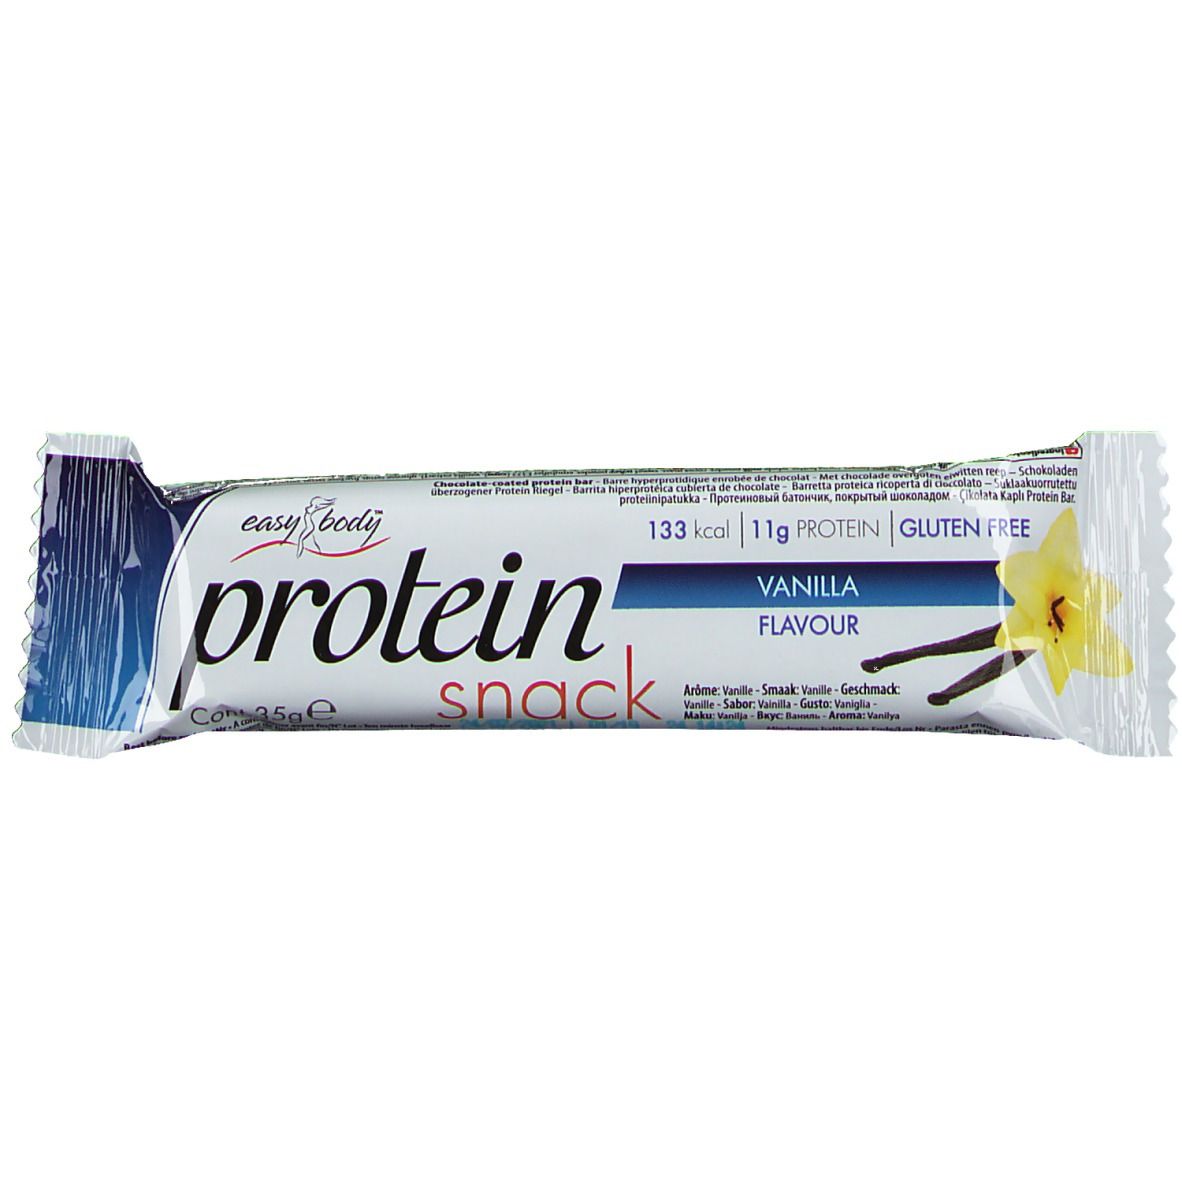 Image of easy body protein snack